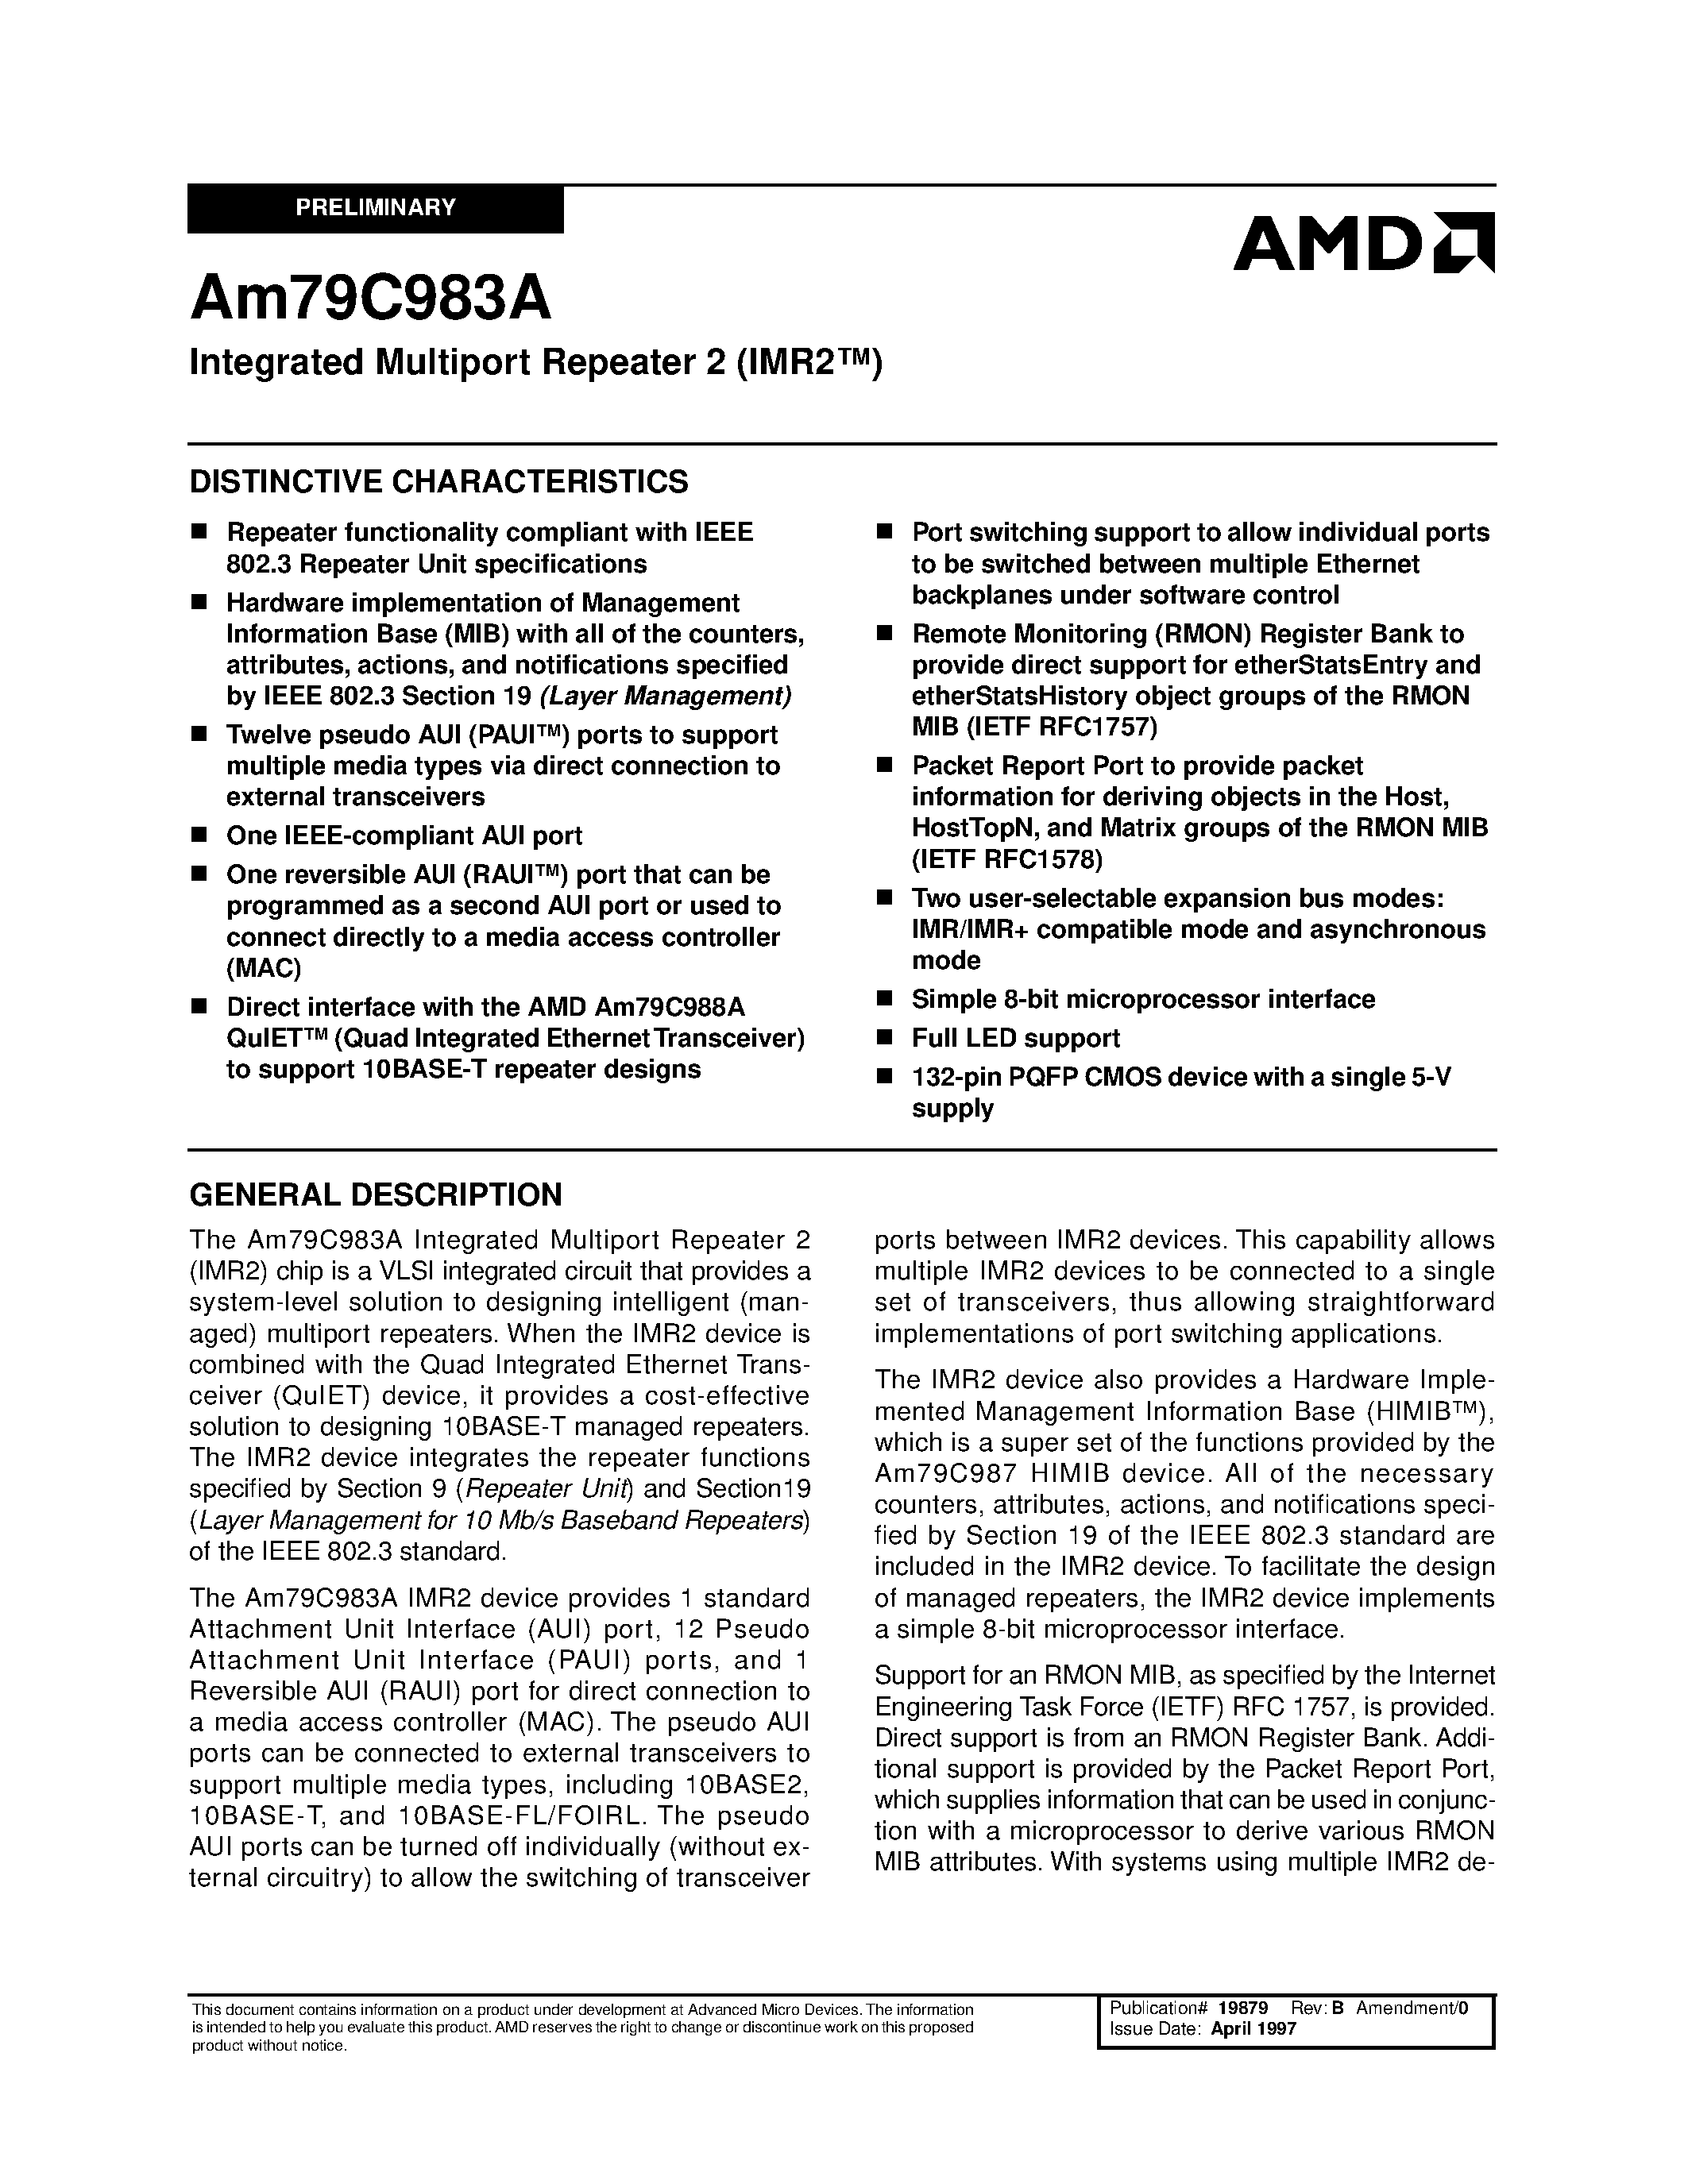 Datasheet AM79C983A - Integrated Multiport Repeater 2 (IMR2) page 1